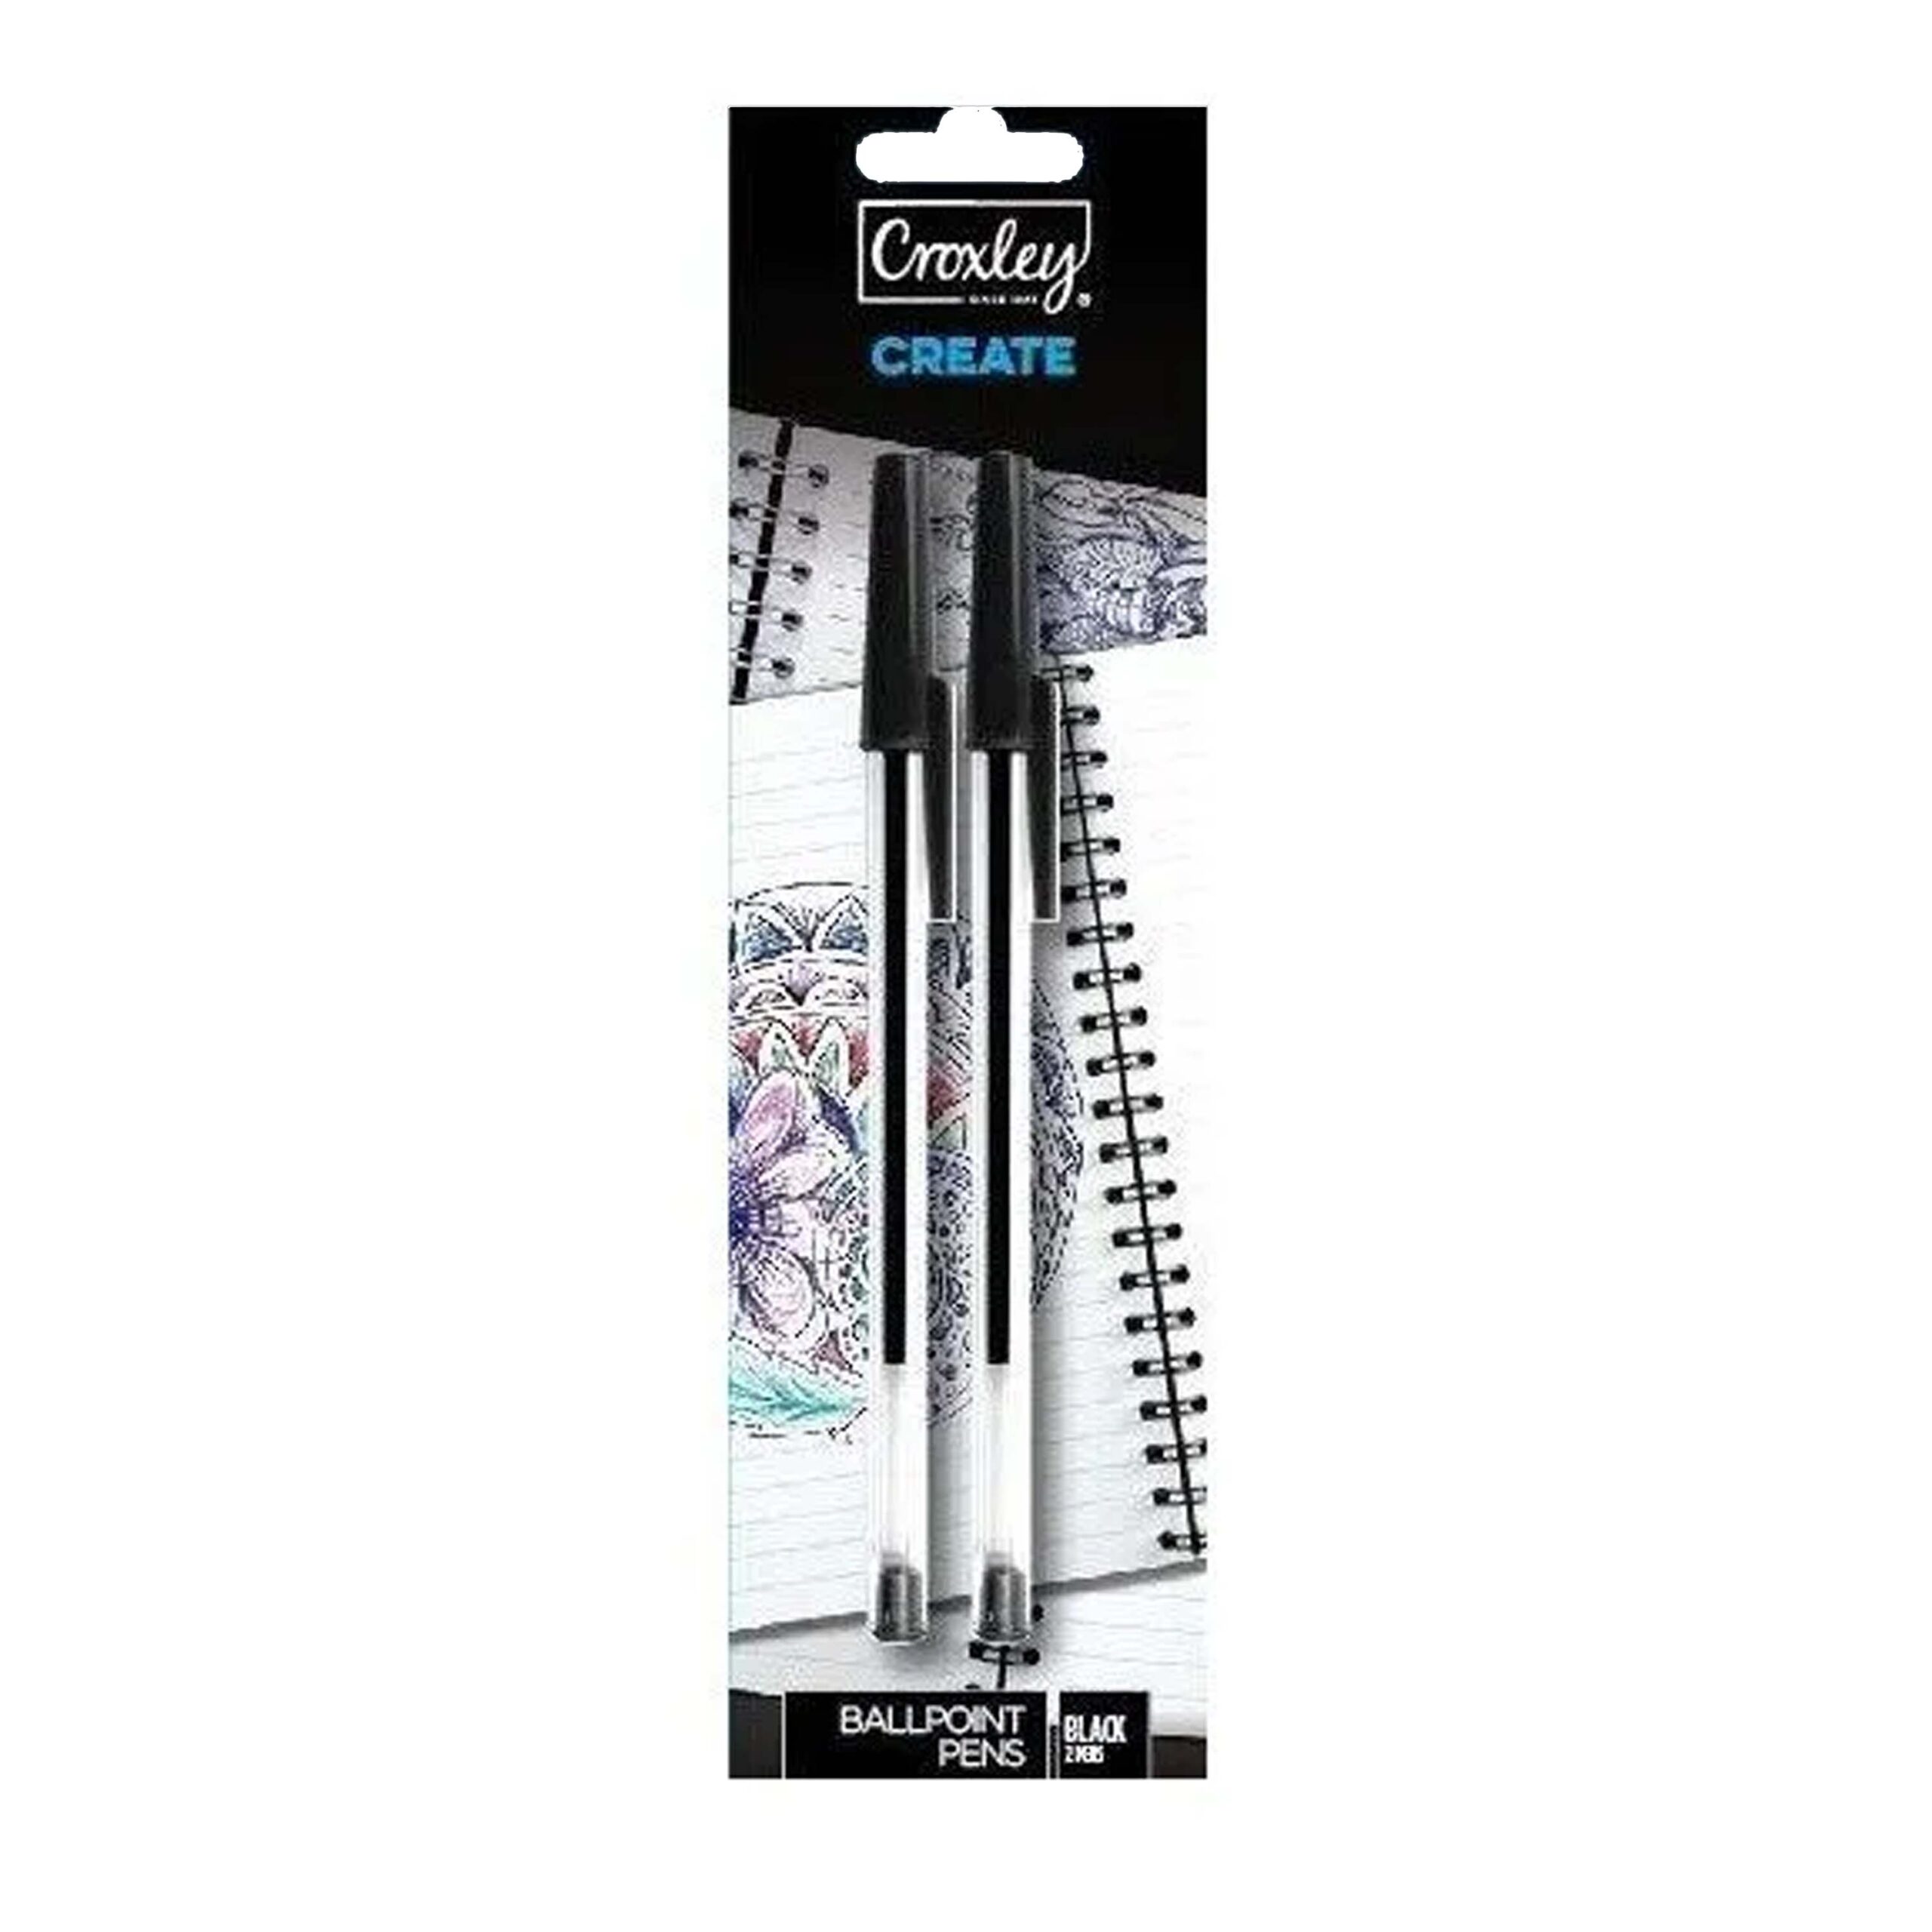 CROXLEY BP PENS
BLK 2 PACK
CARDED